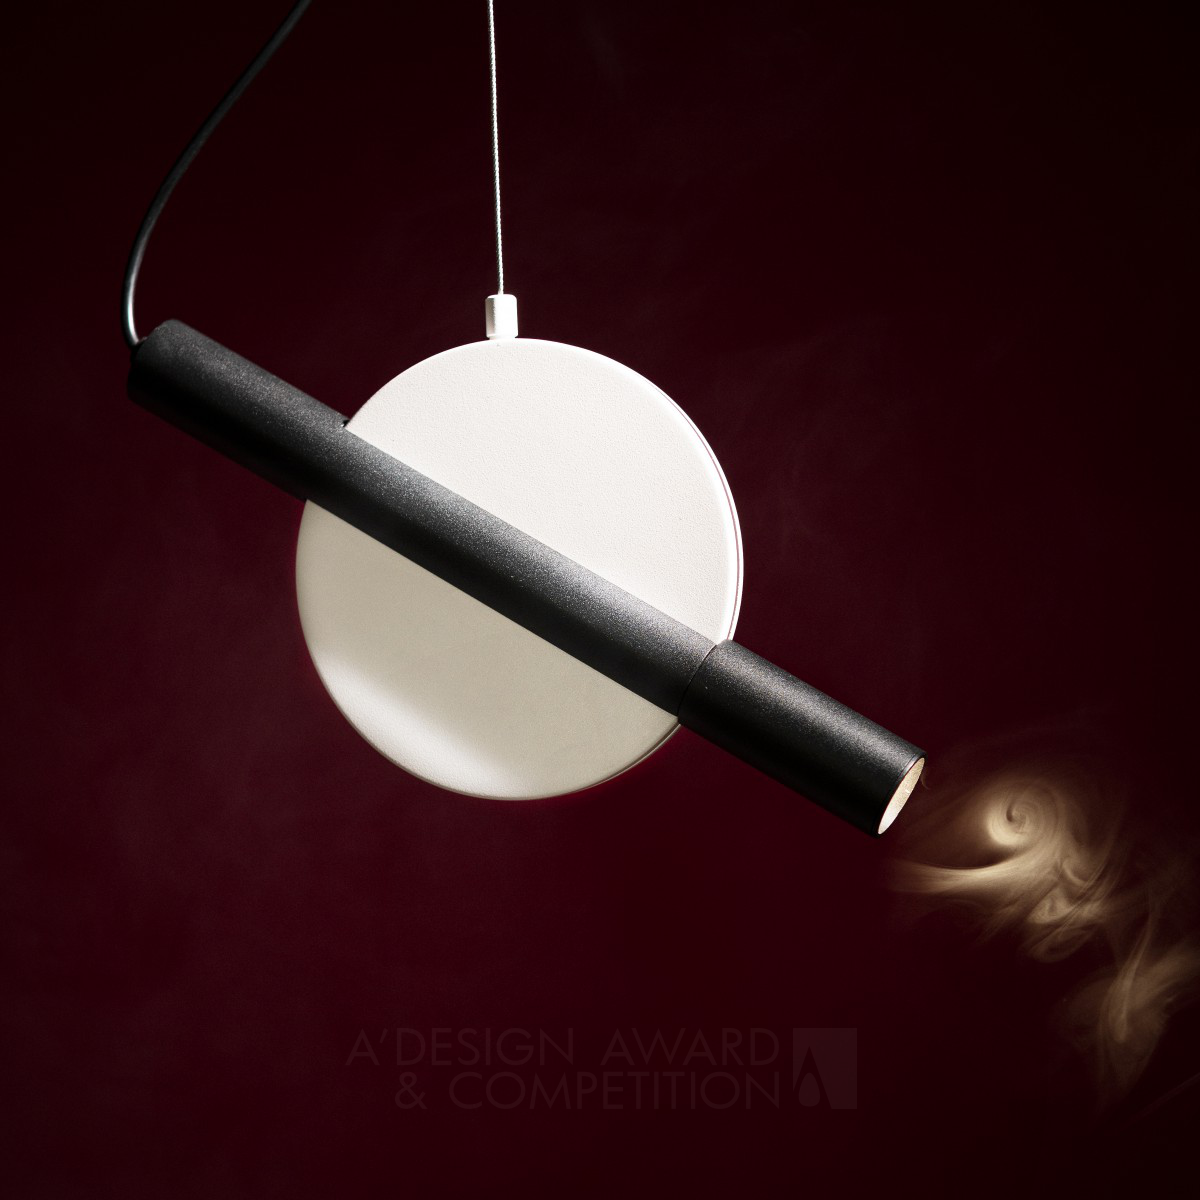 Insight Pendant Lamp by Alexey Danilin Silver Lighting Products and Fixtures Design Award Winner 2023 